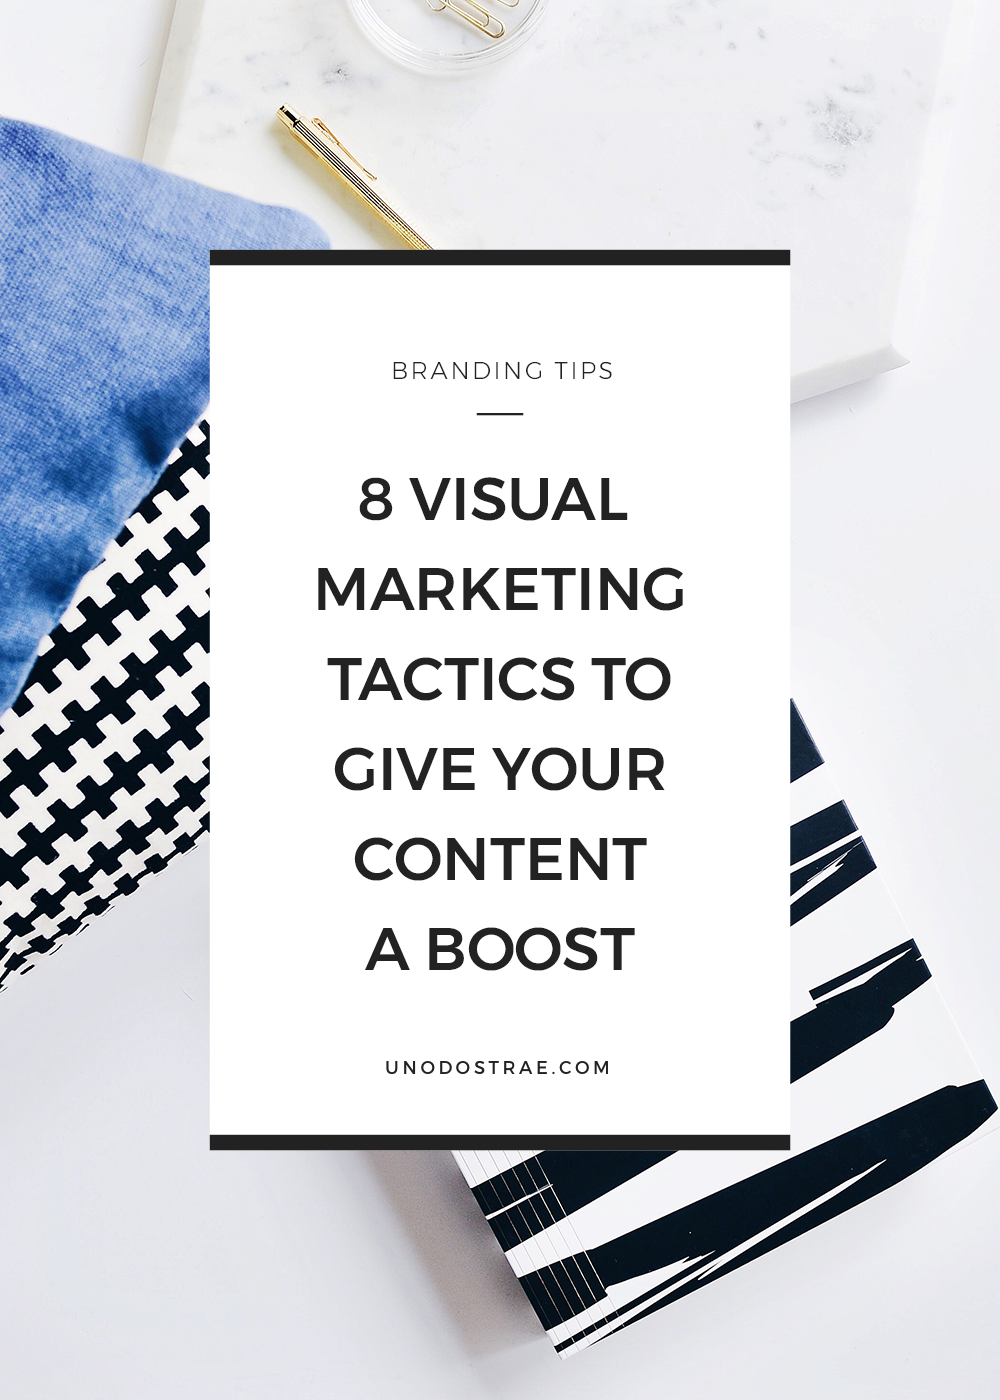 Amp up your content with these visual marketing ideas and inspiration.